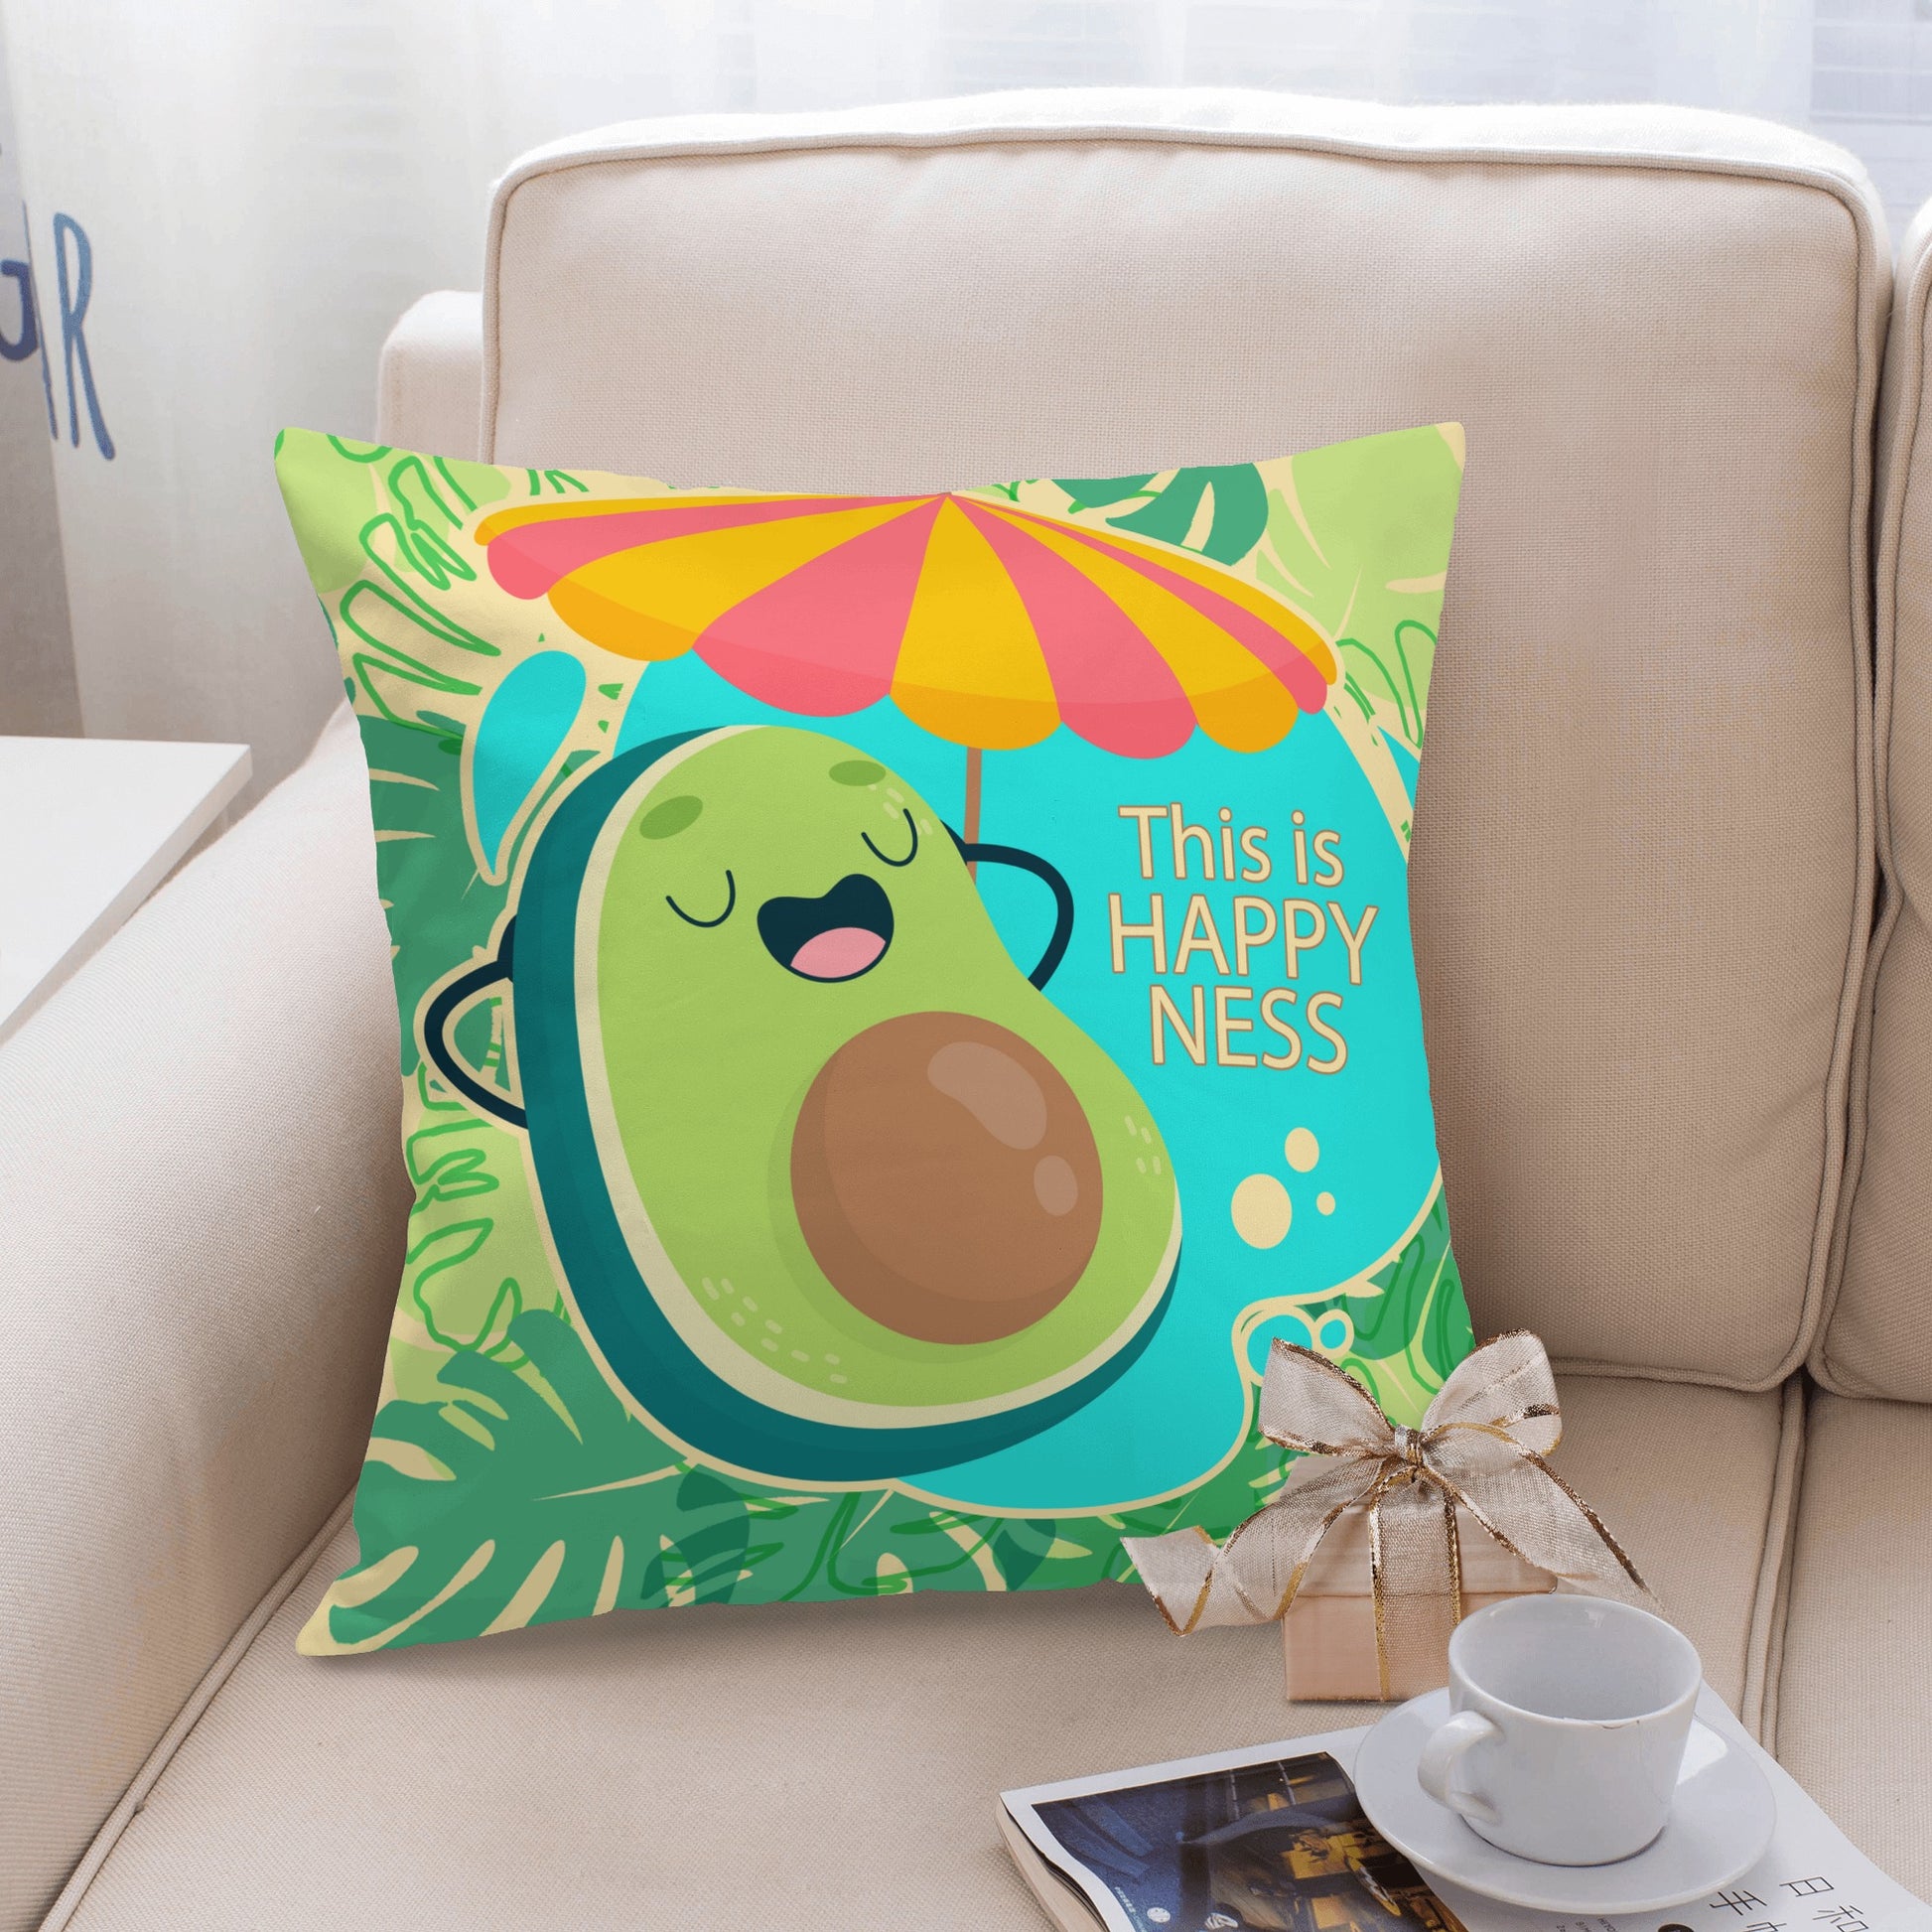 Elevate your space with the vibrant, tasty, and oh-so-cushy vibes of the Avocado Happiness Pillow Cover! Whether you're looking to add a pop of color to your couch or a dollop of fun to your bedding situation, this pillow cover packs just the right amount of "YUM!" to chic-ify your room!